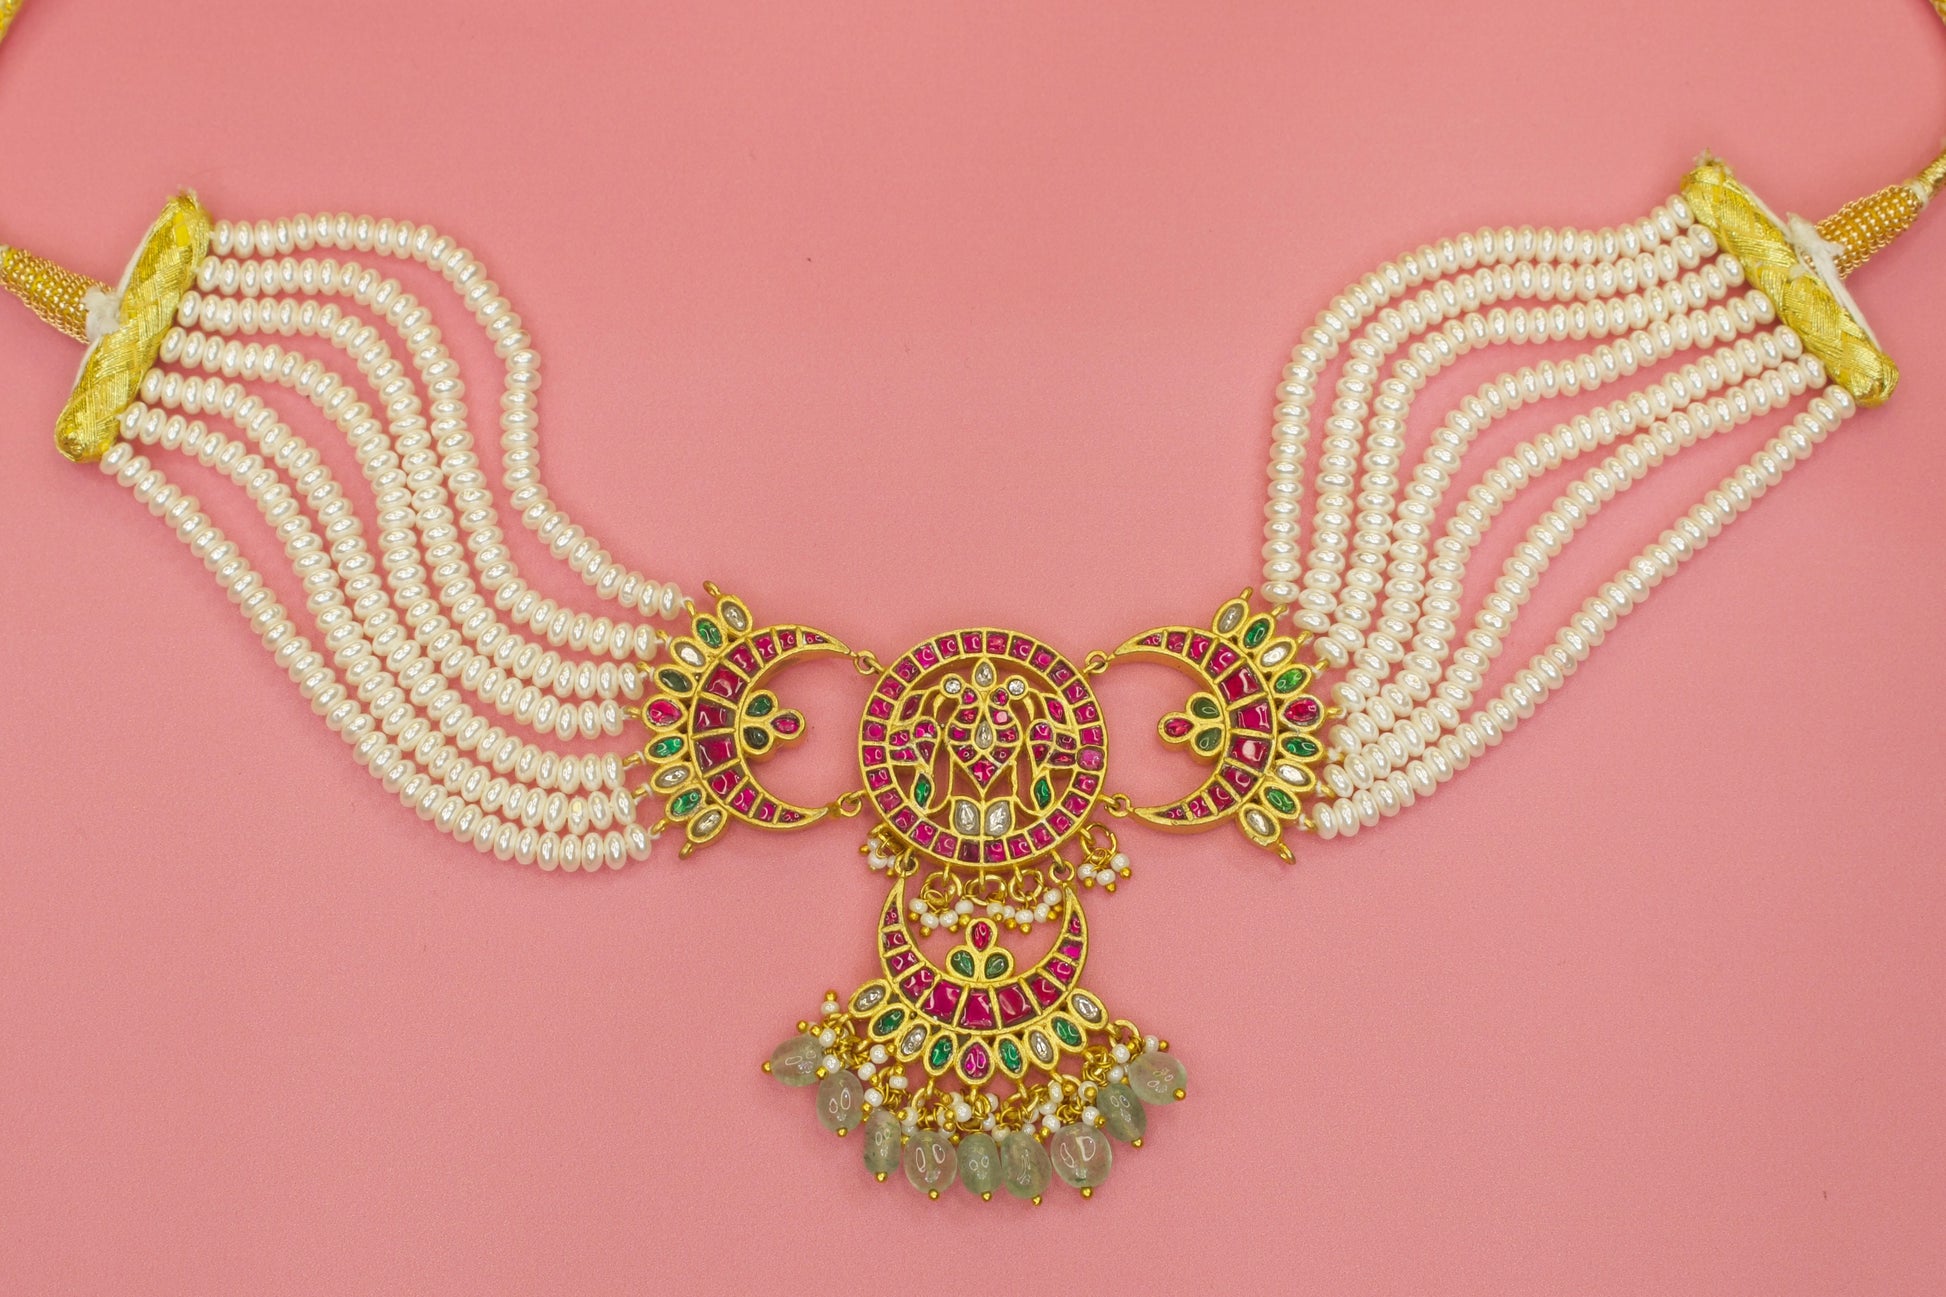 Heavenly Jadau setting Kundan Choker with uncut ruby and emerald gemstones, rice pearls, and beads! This traditional jewellery is apt for wedding and festive occasions!